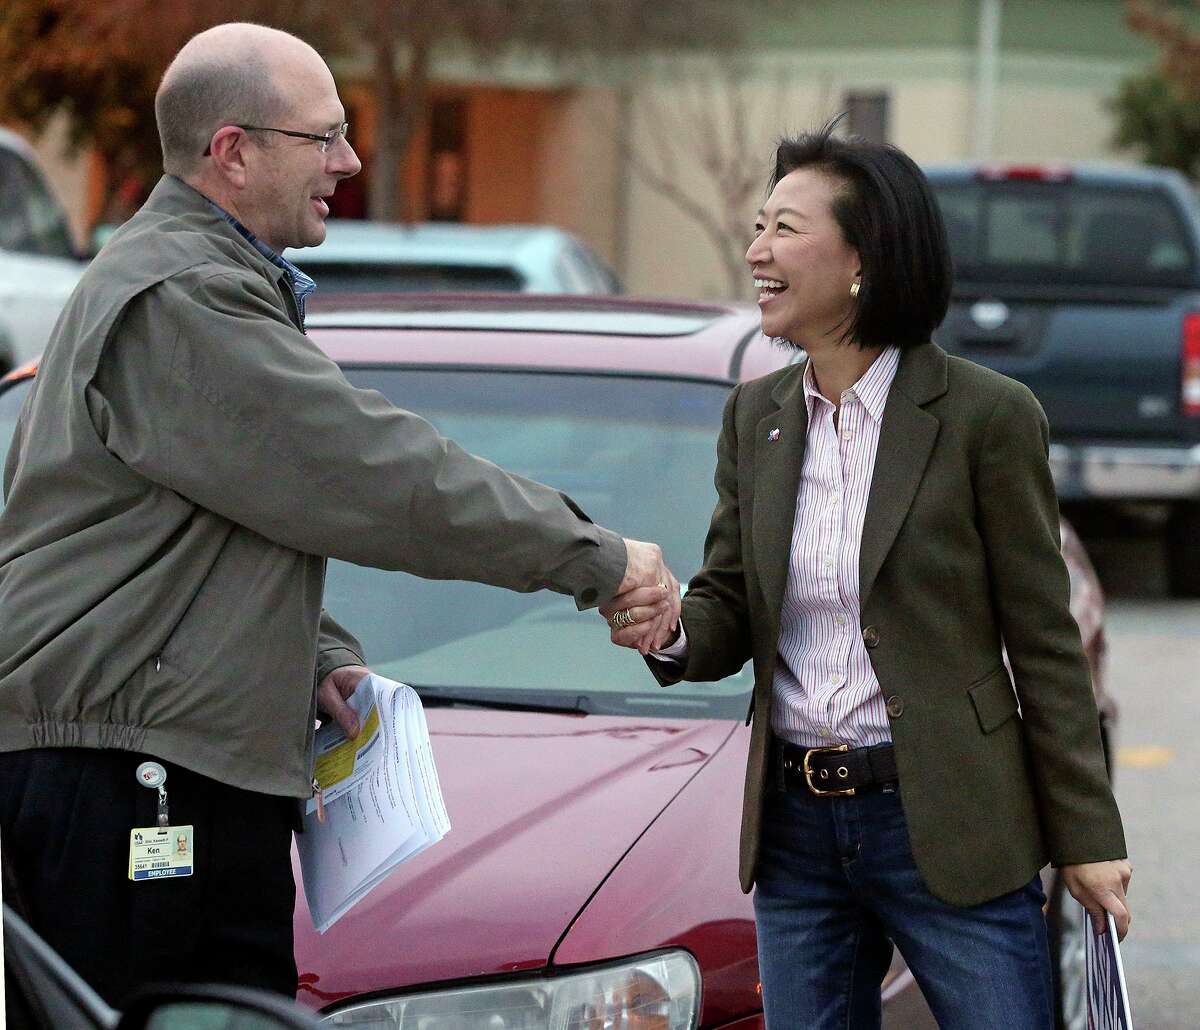 Tone-deaf comments about LGBTQ people drove Elisa Chan into political exile in 2013. Now, she’s running for a seat in the Texas House. On Tuesday, she was the top vote getter in the Republican primary in House District 122.